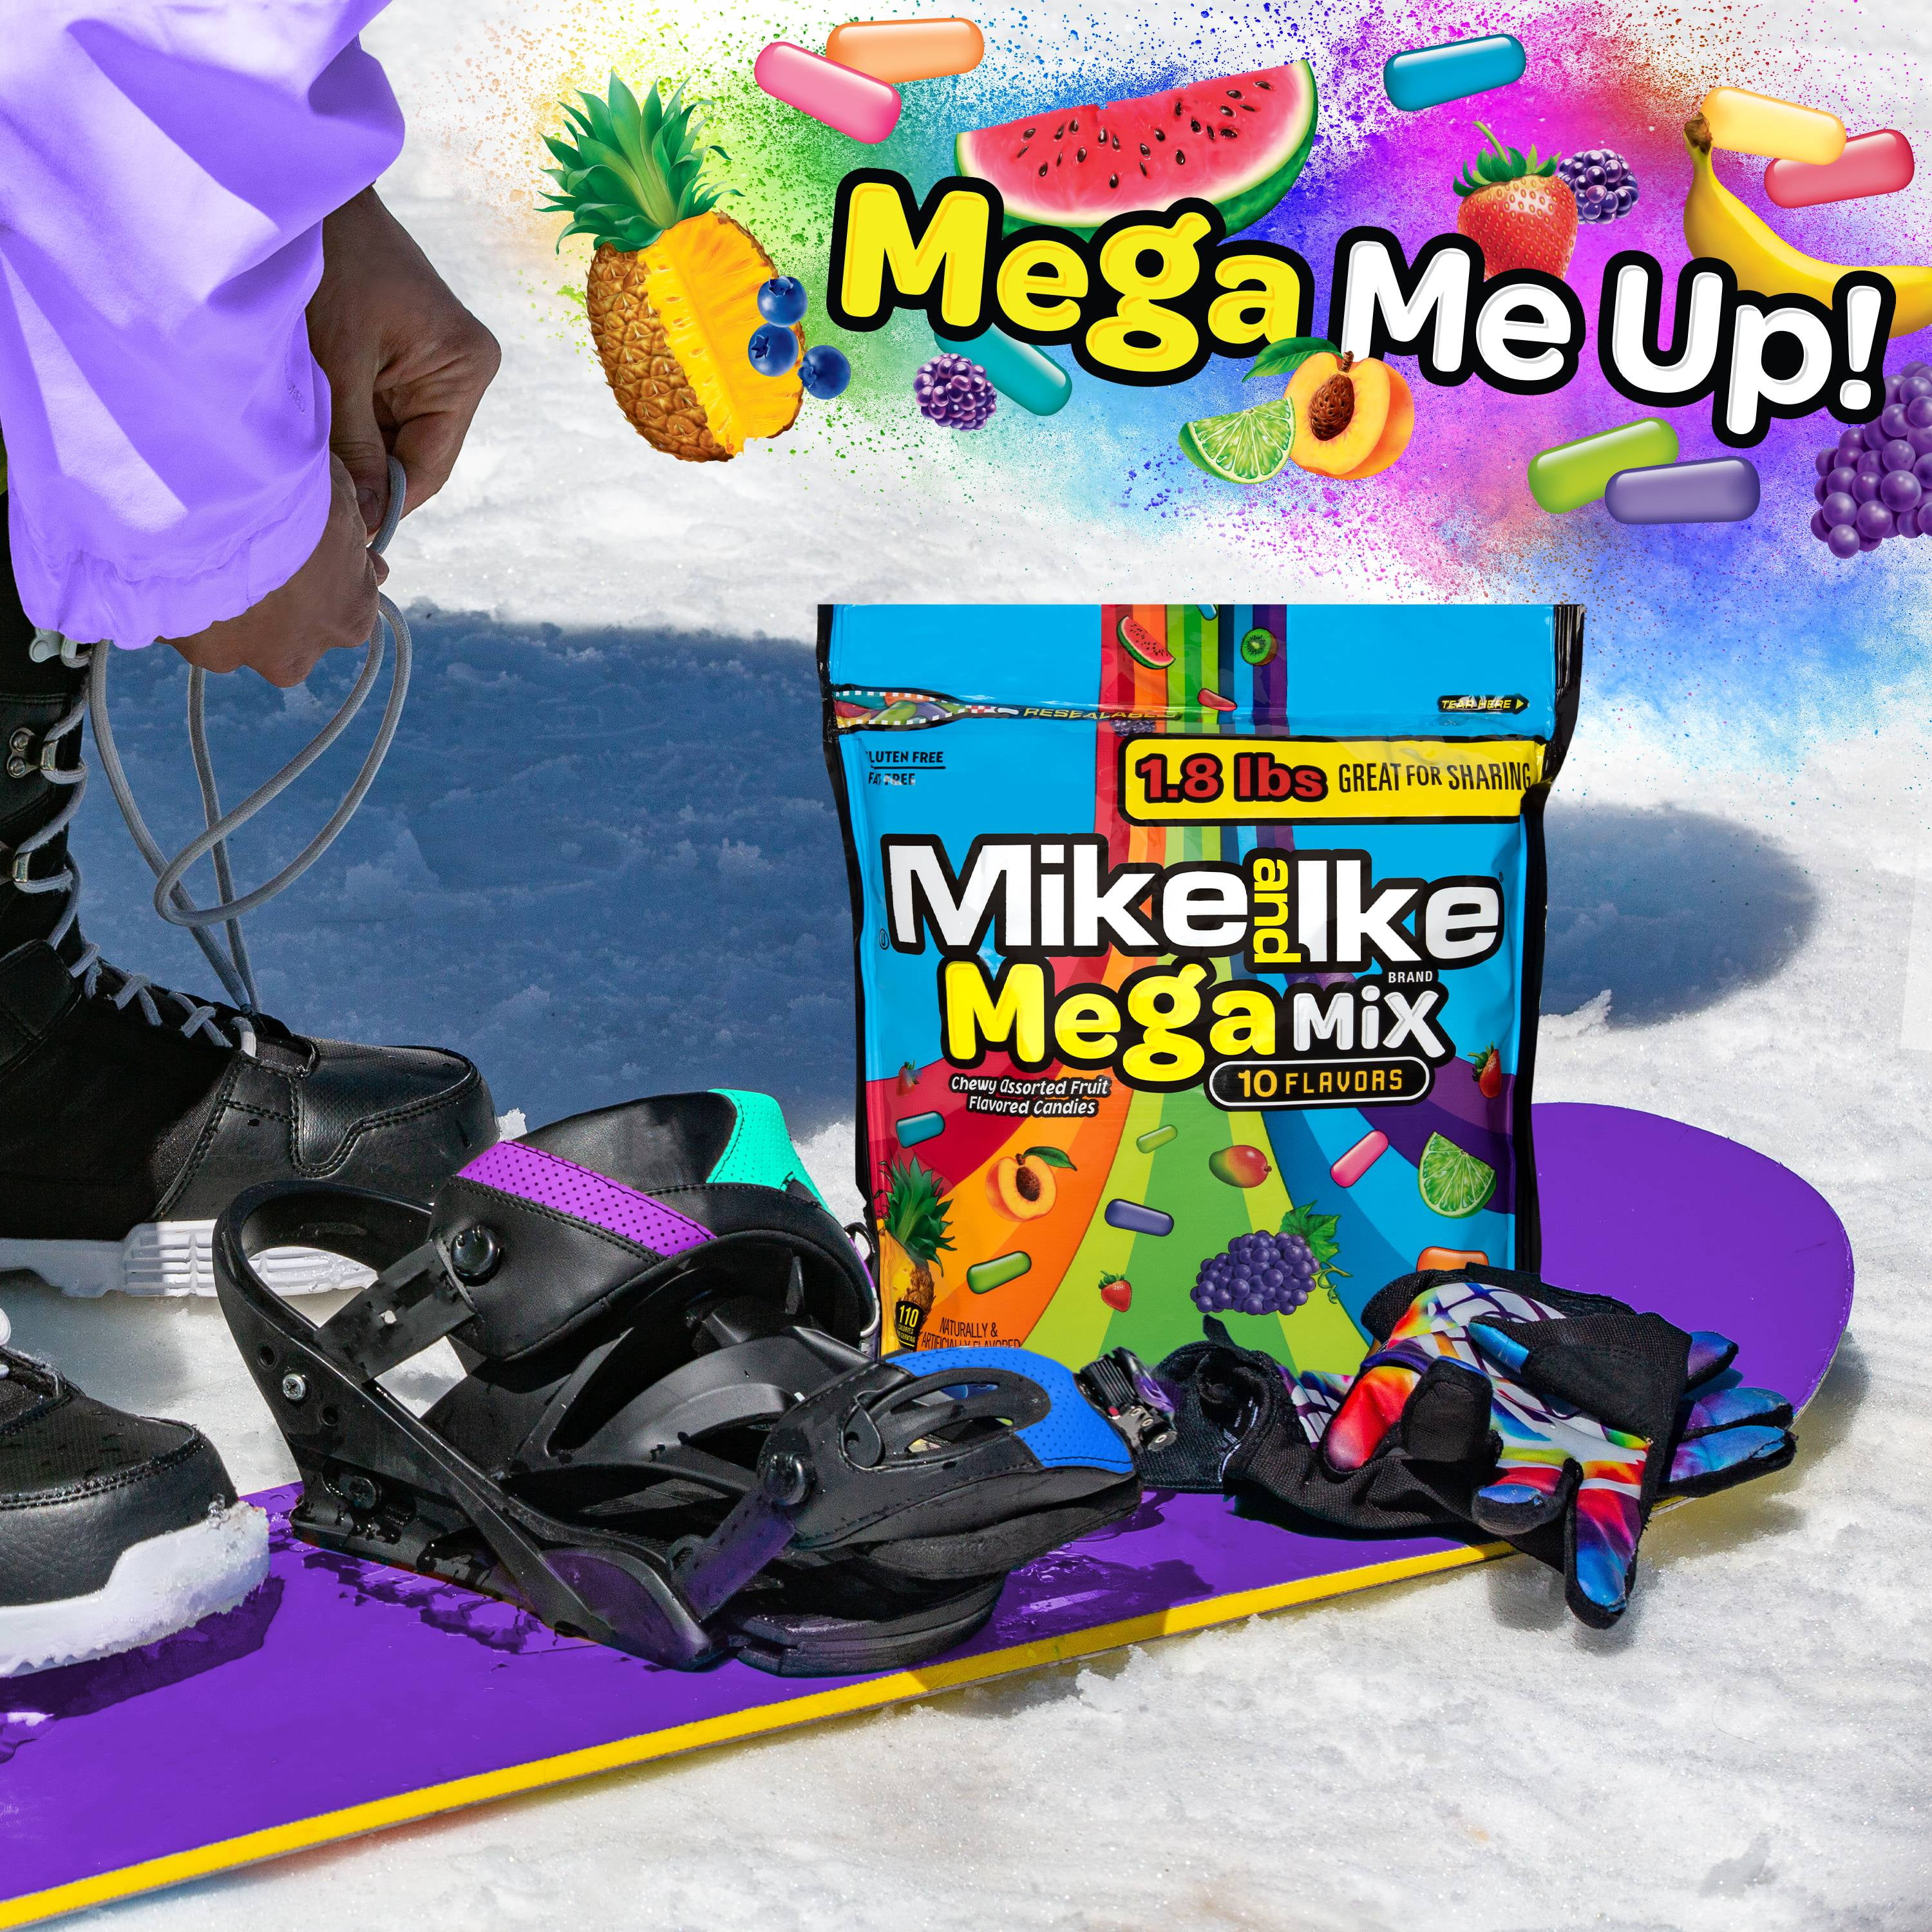 Mike Ike Mega Mix Sour Stand Up Bag, 10 Ounces, 8 per Case, Price/Case